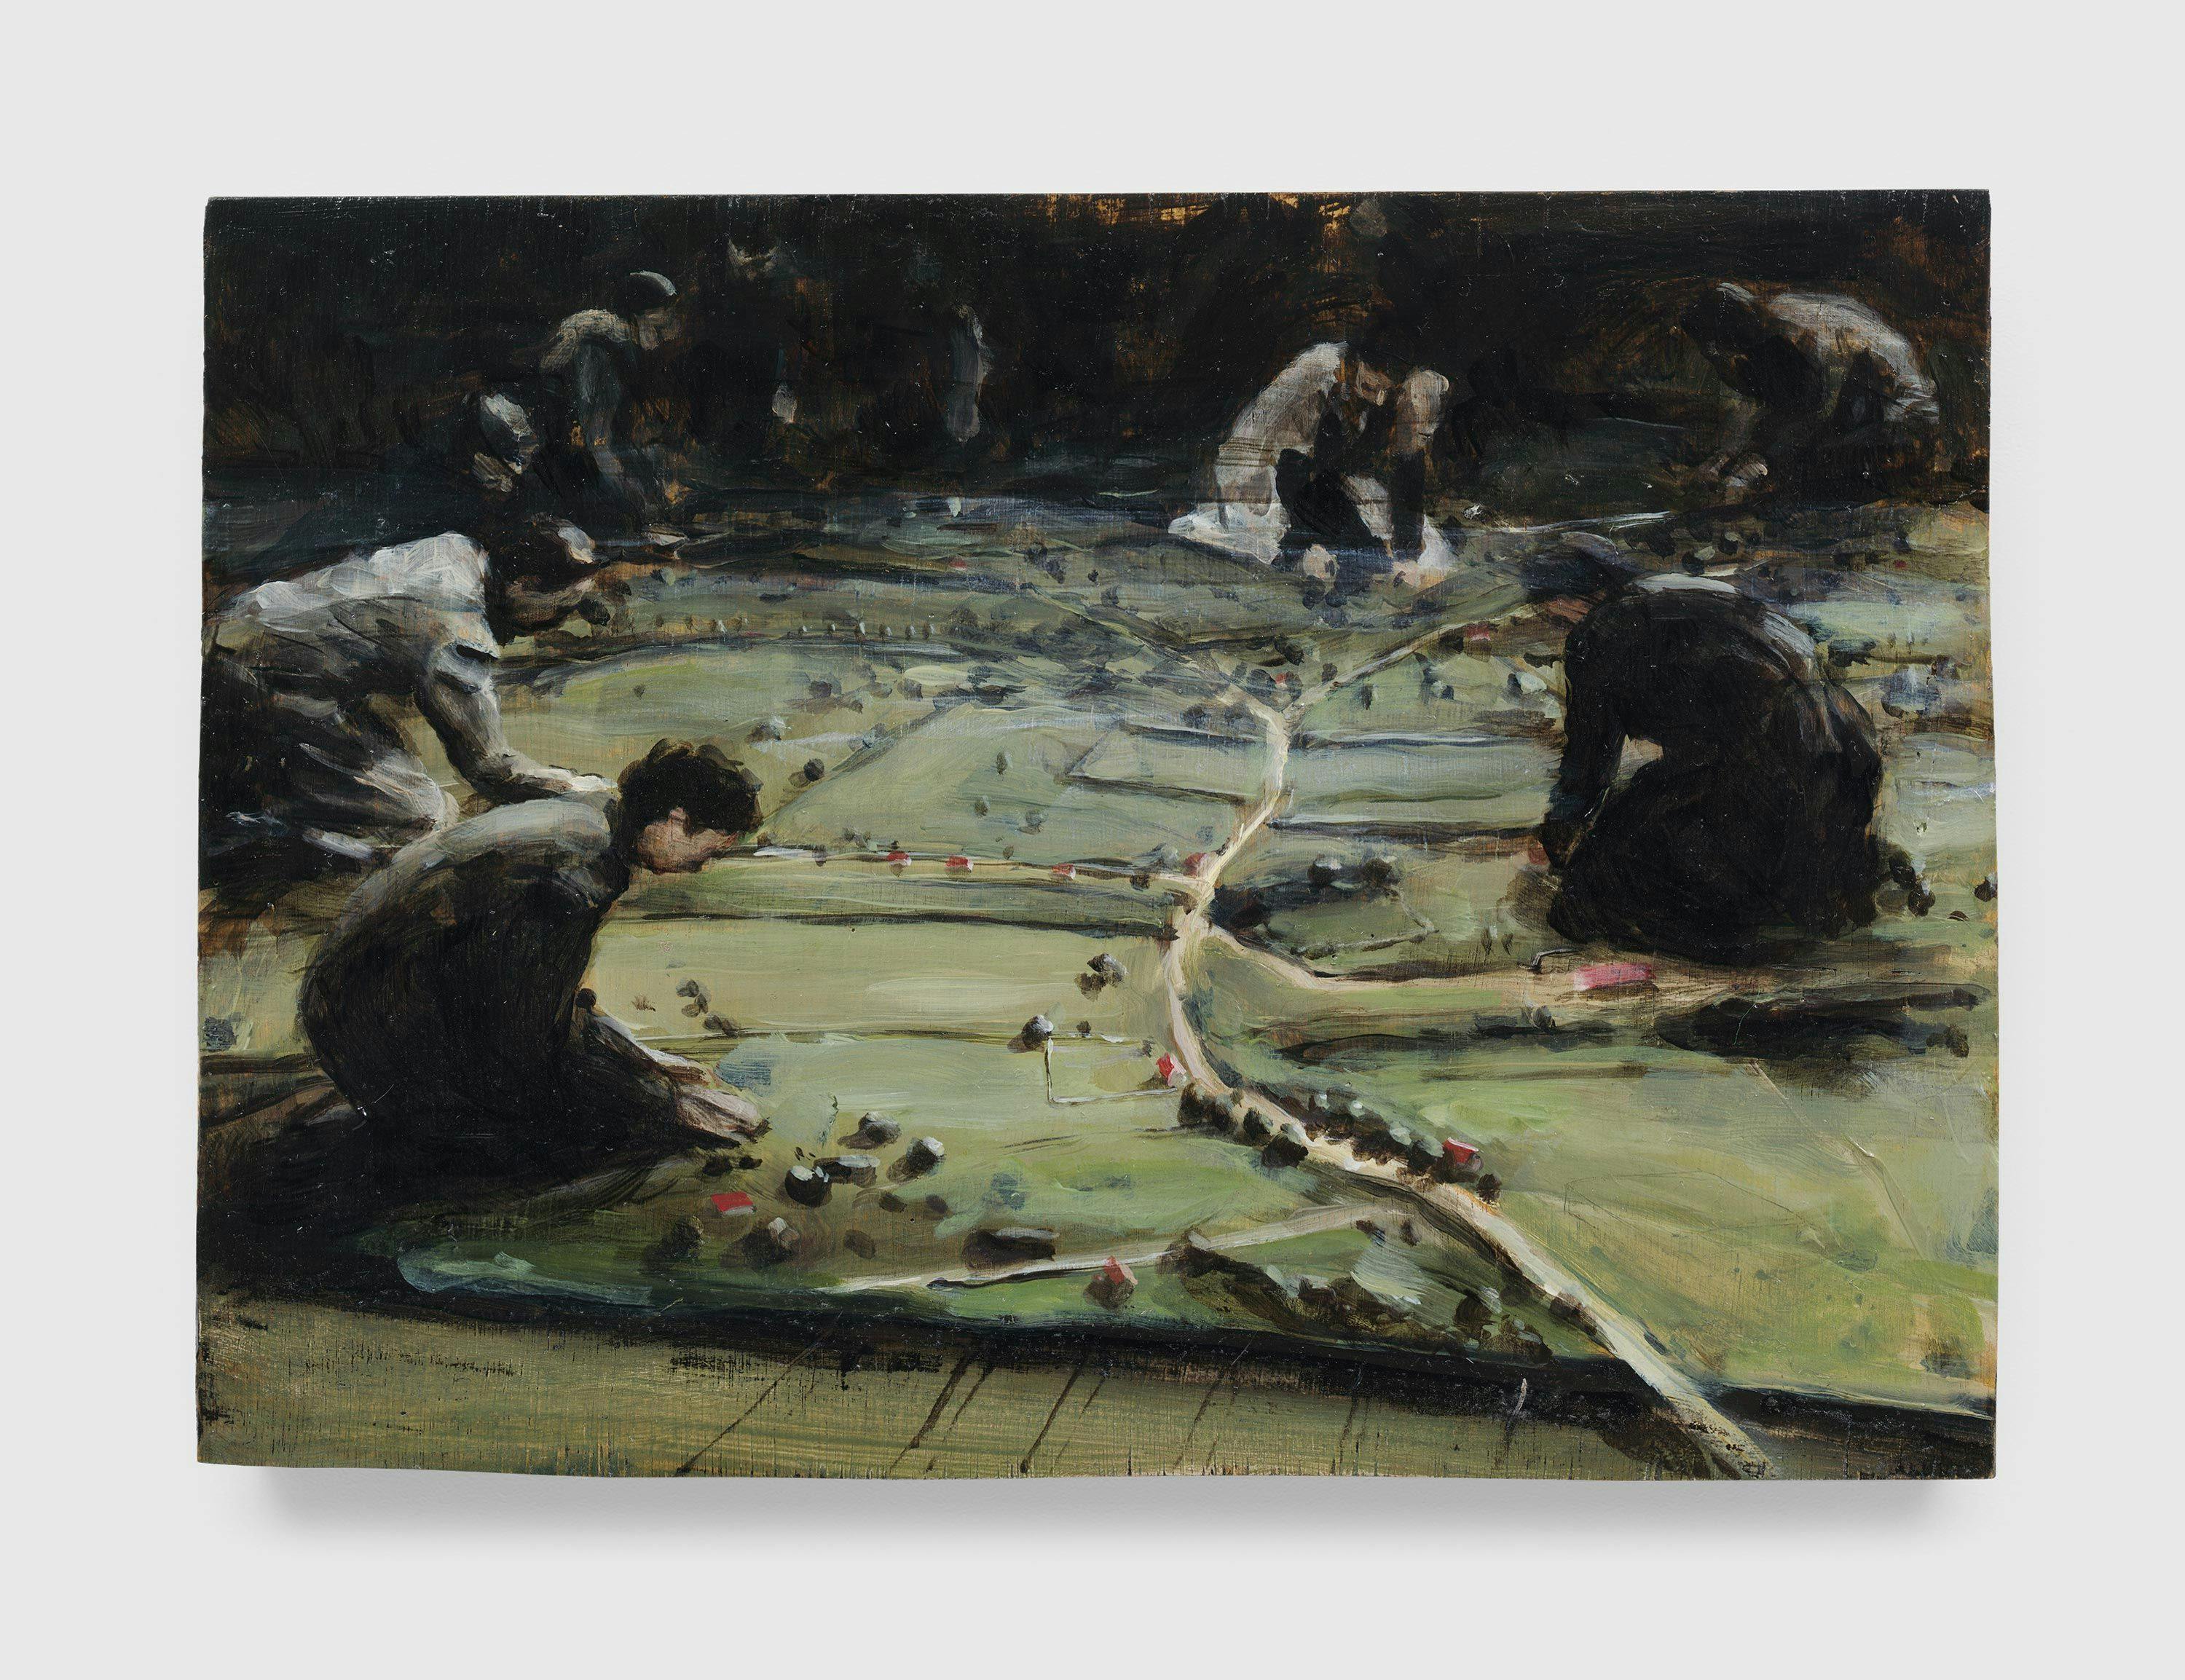 A painting by Michaël Borremans, titled E-Trickland, 2003 to 2004.